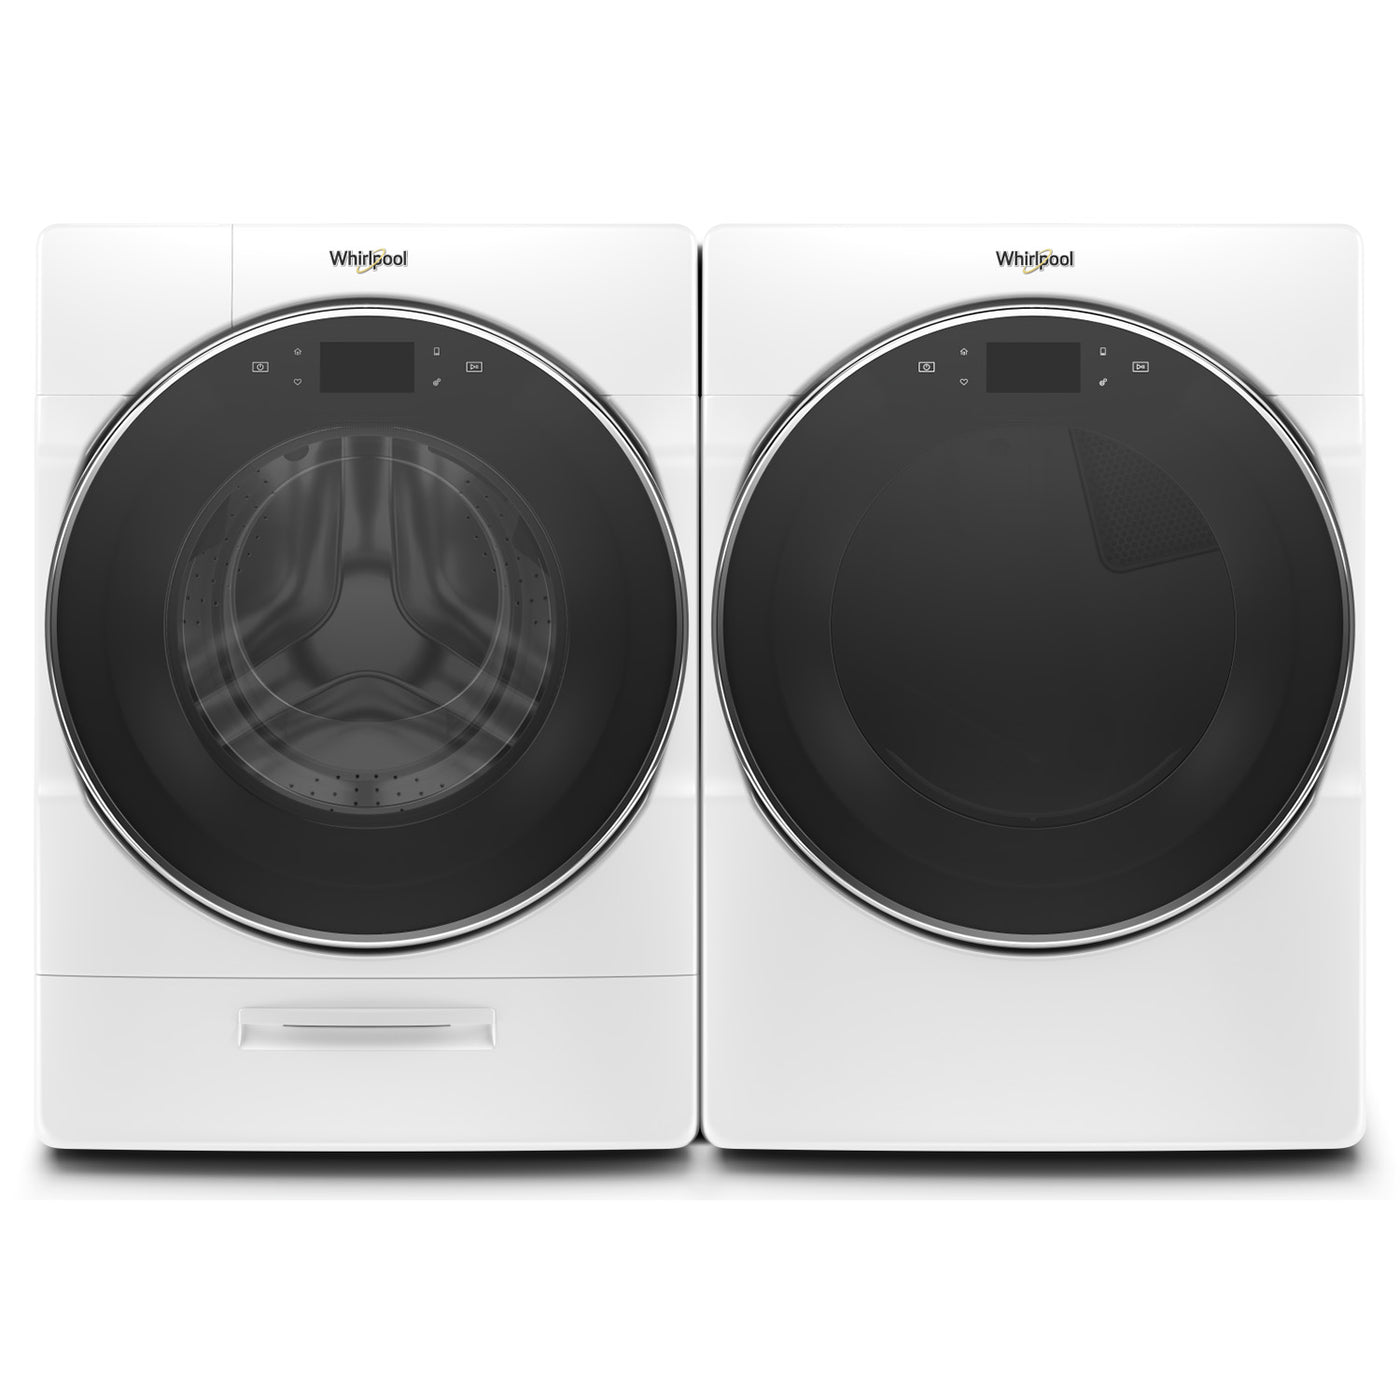 Whirlpool White Front-Load Washer (5.8 cu. ft.) & Gas Dryer (7.4 cu. ft.) - WFW9620HW/WGD9620HW